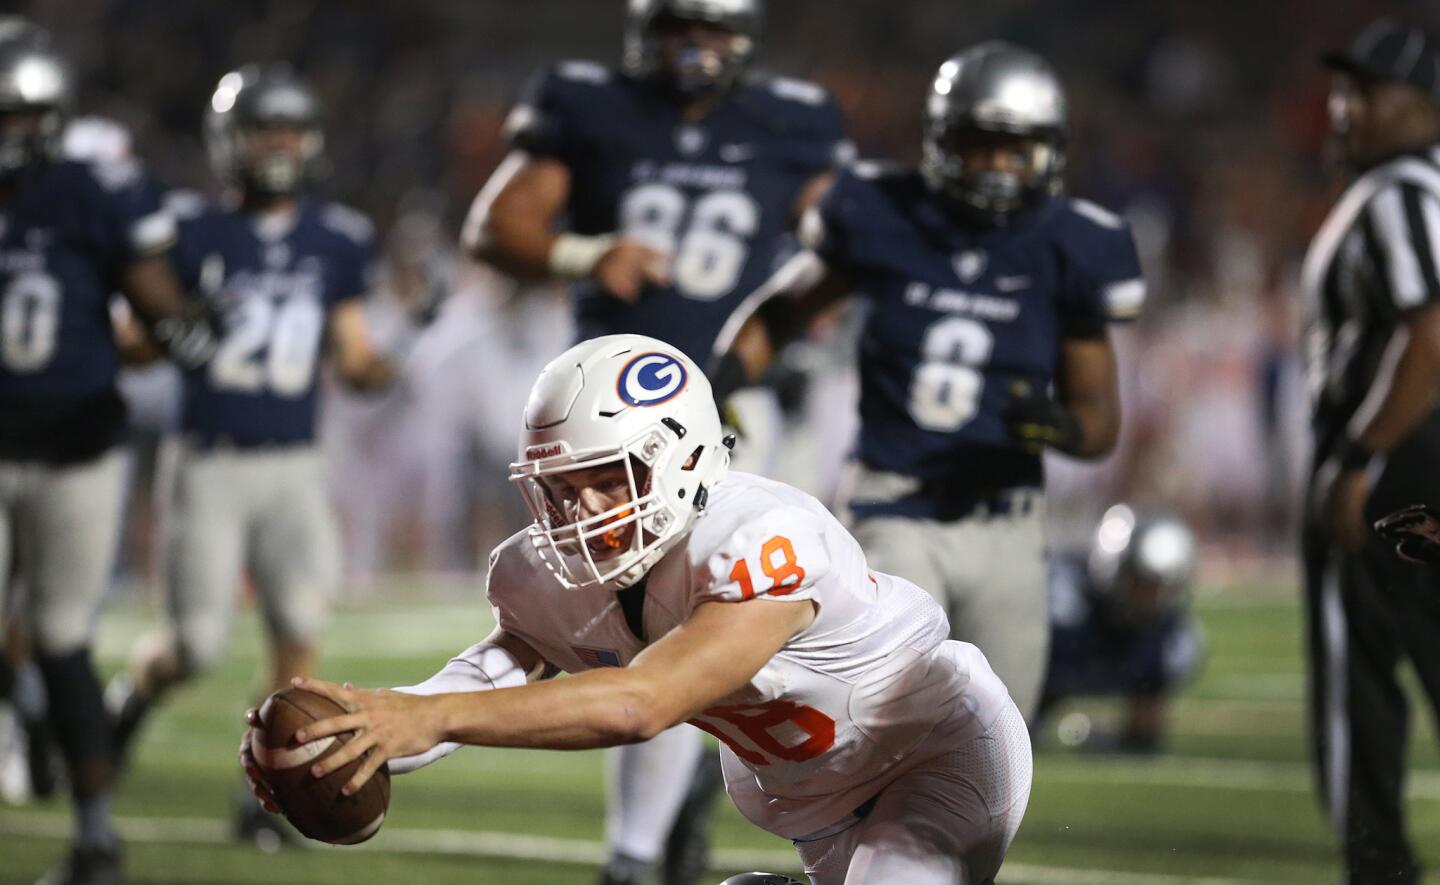 St. John Bosco's defense can only watch as Bishop Gorman's Tate Martell reaches the ball over the goal line for a second half score.